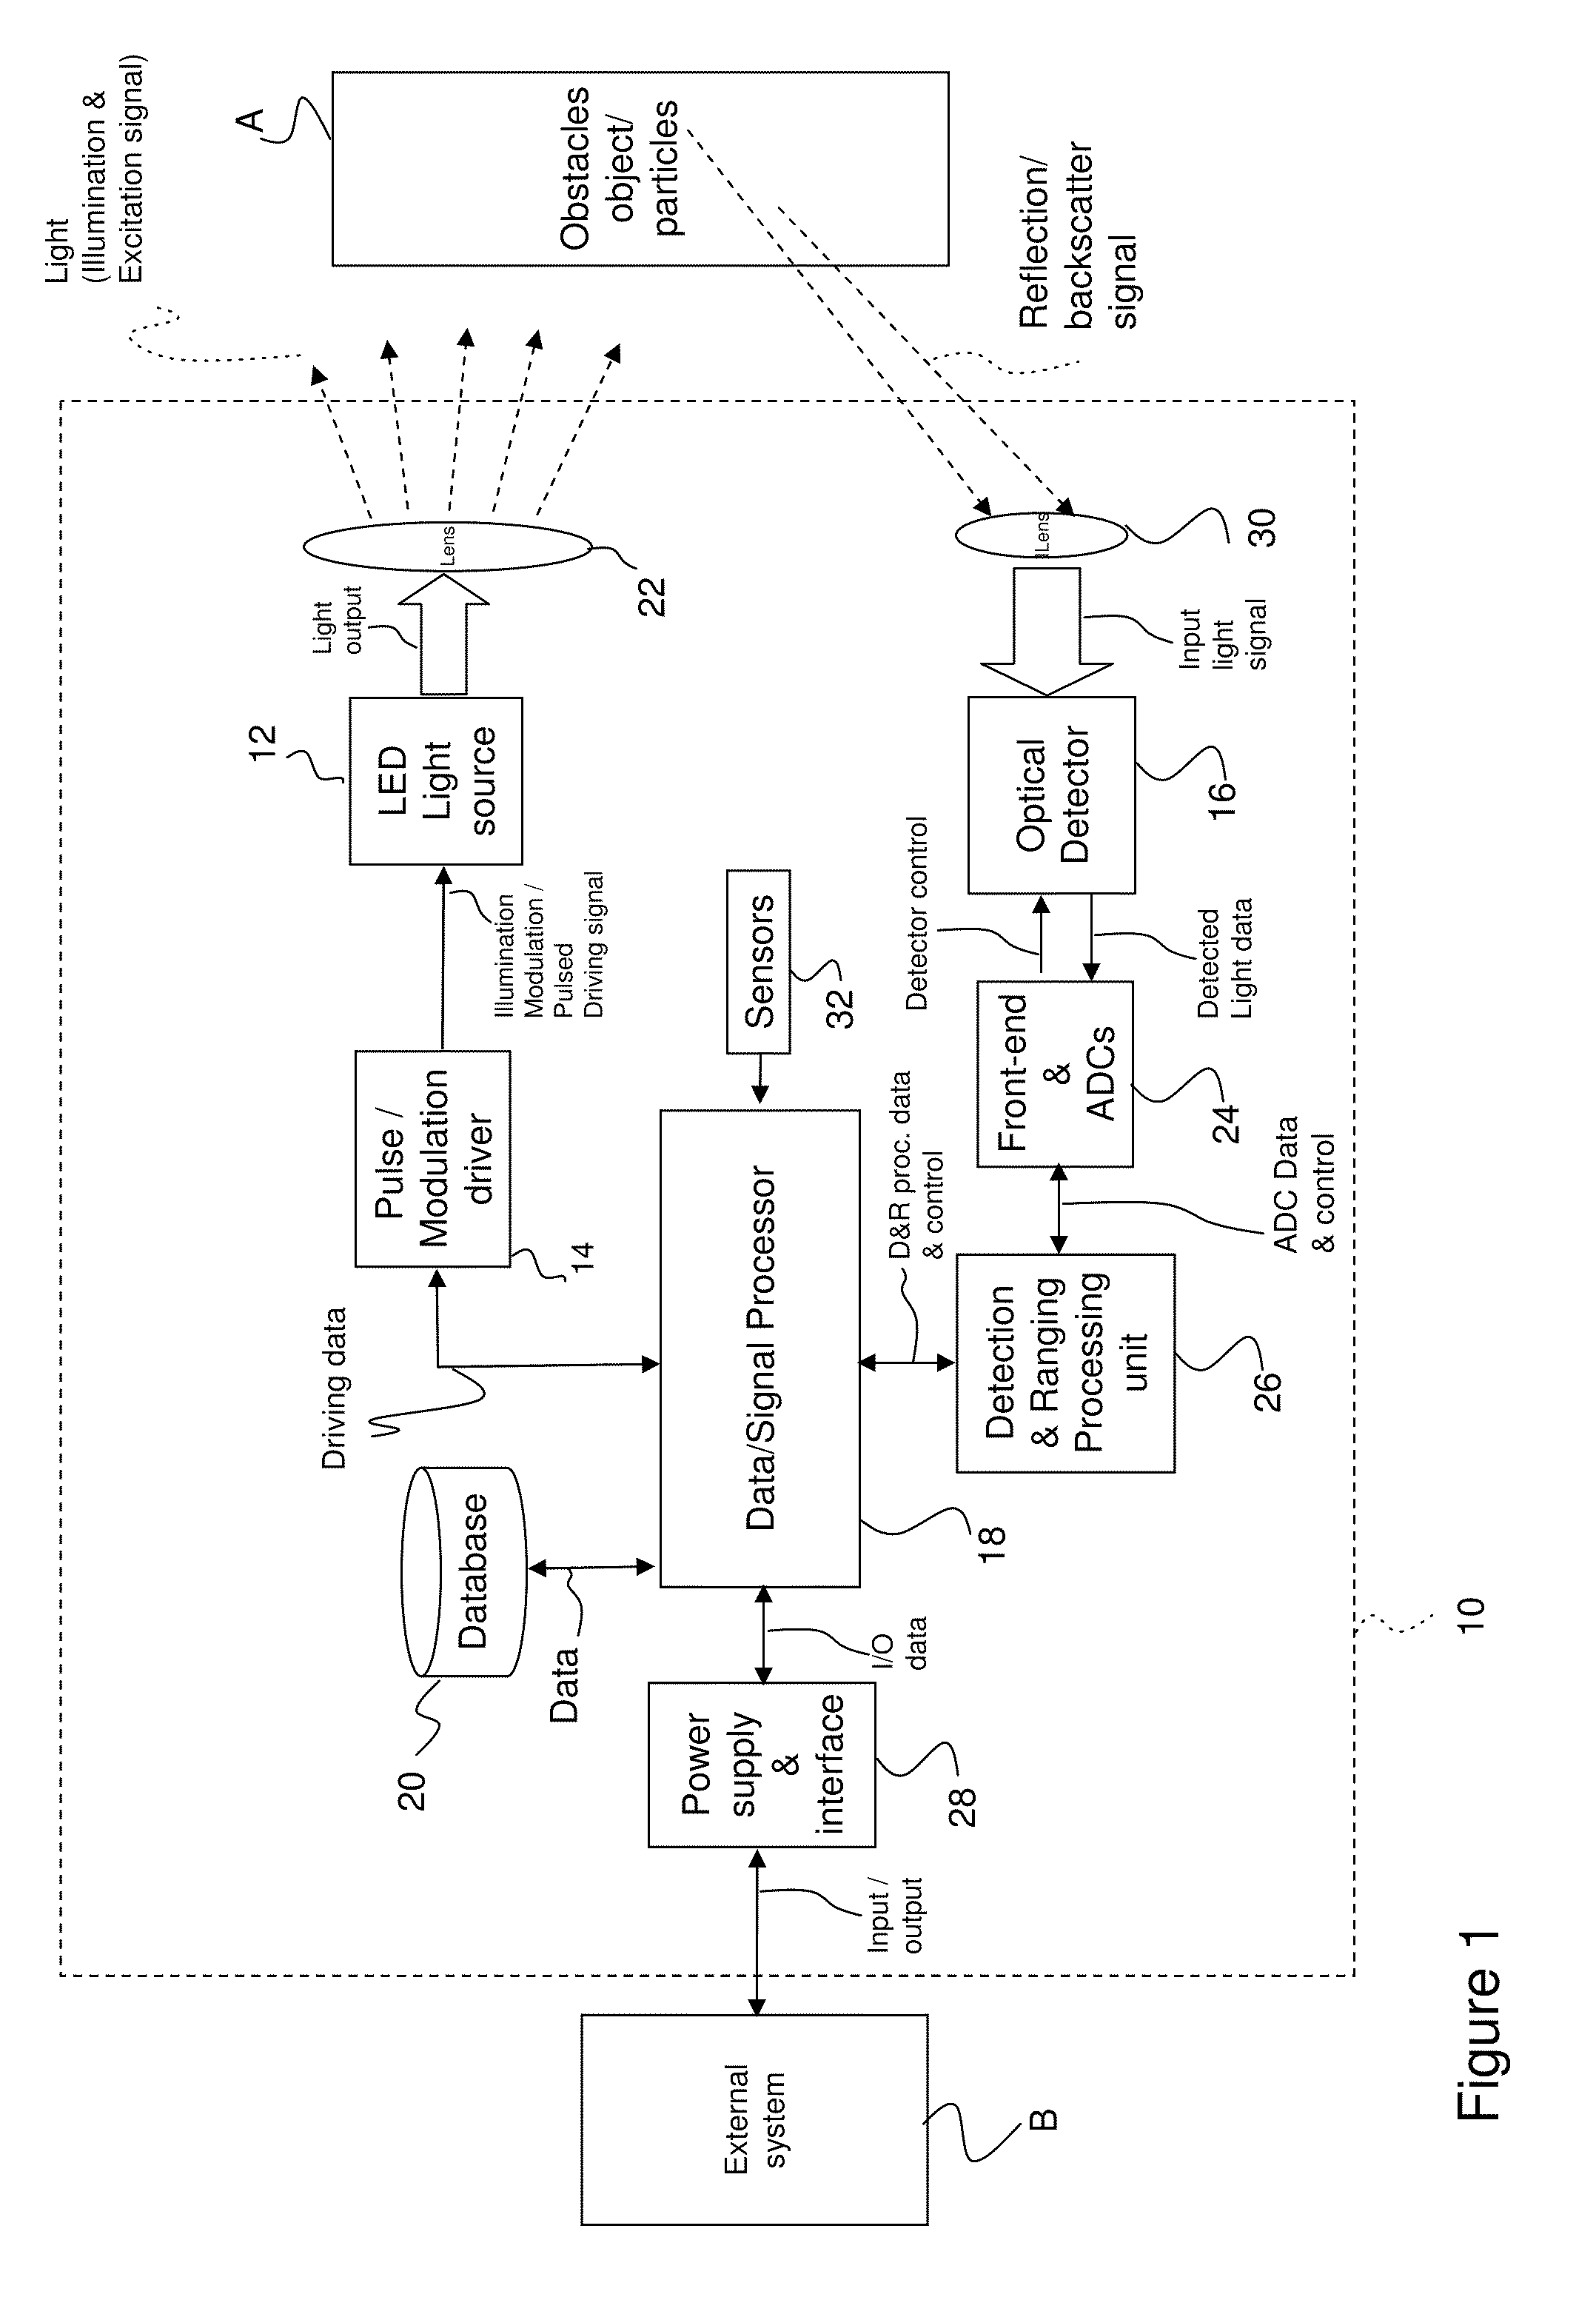 Multi-channel LED object detection system and method